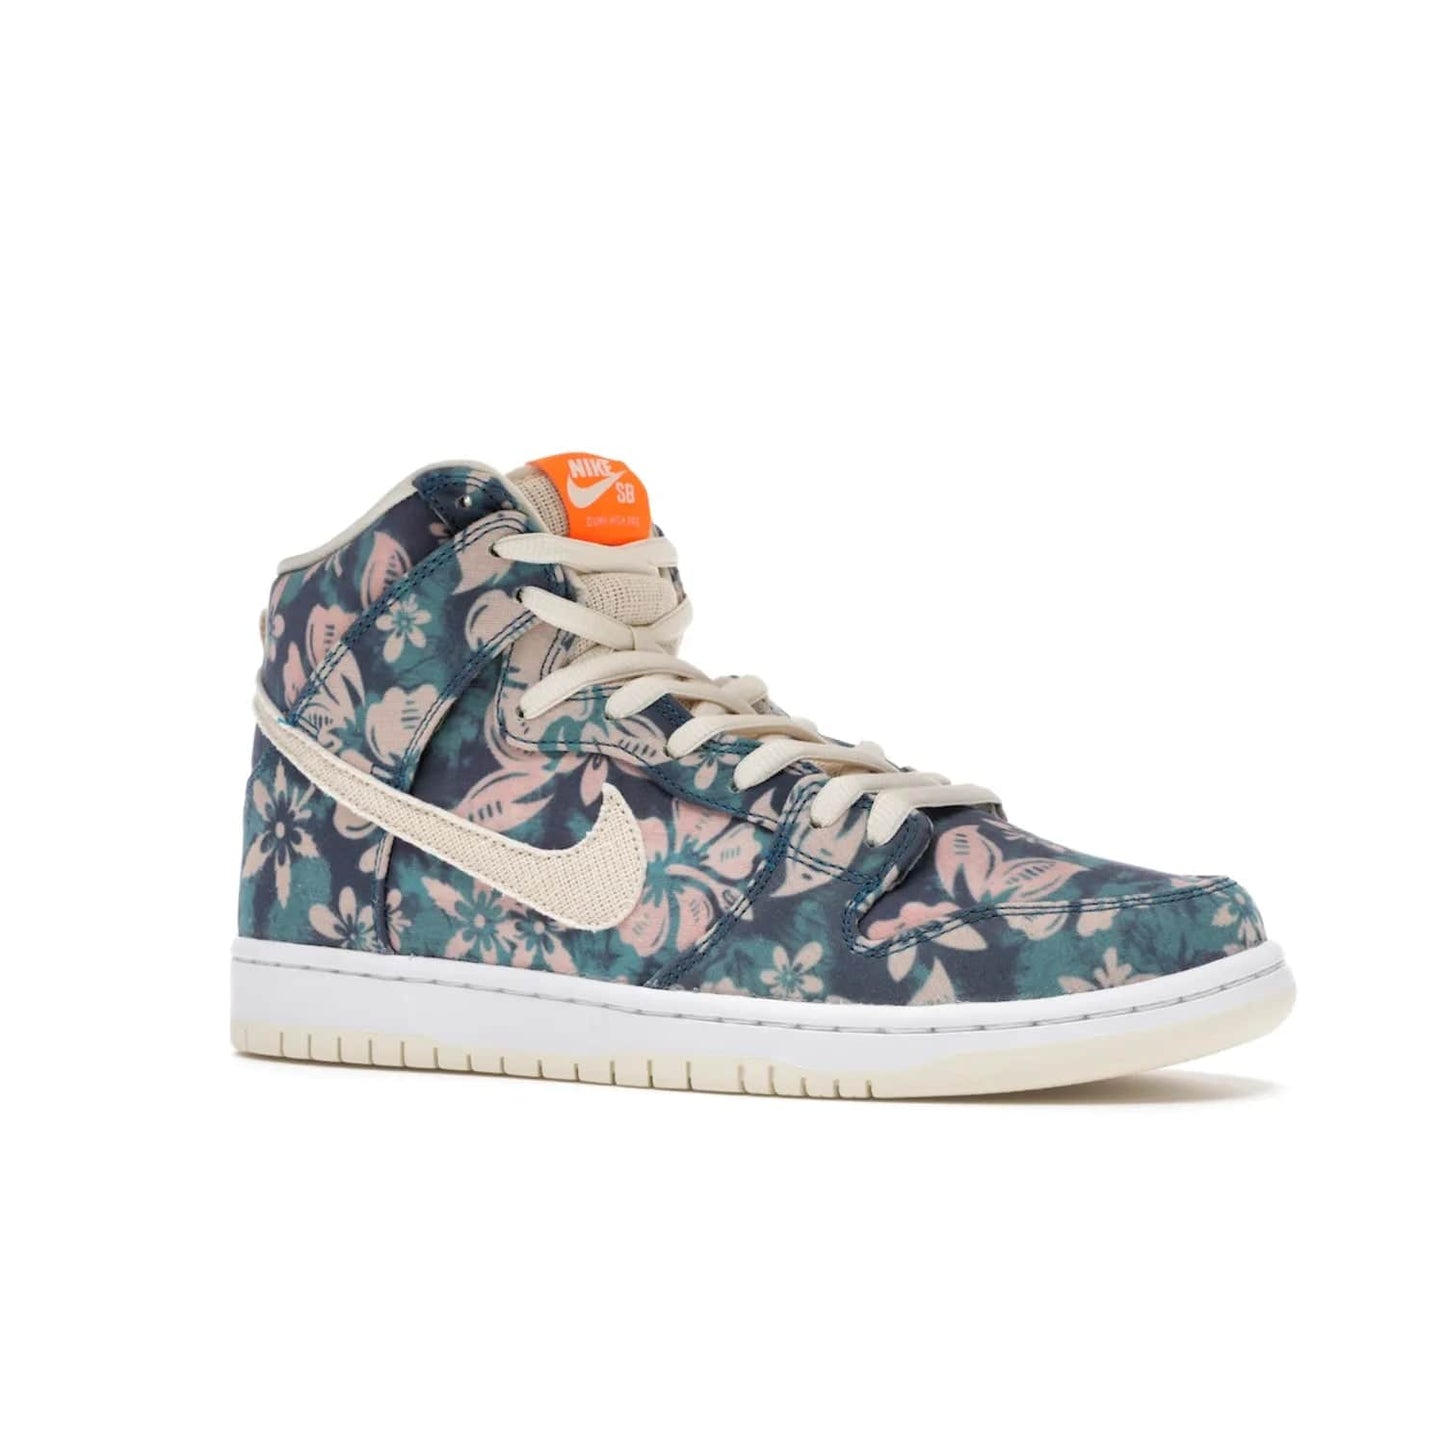 Nike SB Dunk High Hawaii - Image 4 - Only at www.BallersClubKickz.com - Introducing the Nike SB Dunk High Hawaii, a colorway celebrating an island paradise. This hybrid silhouette brings together tropical vibes with a sun-soaked look. Blue, green, pink and orange on a sail and white outsole. Get your island vibes with the Nike SB Dunk High Hawaii.